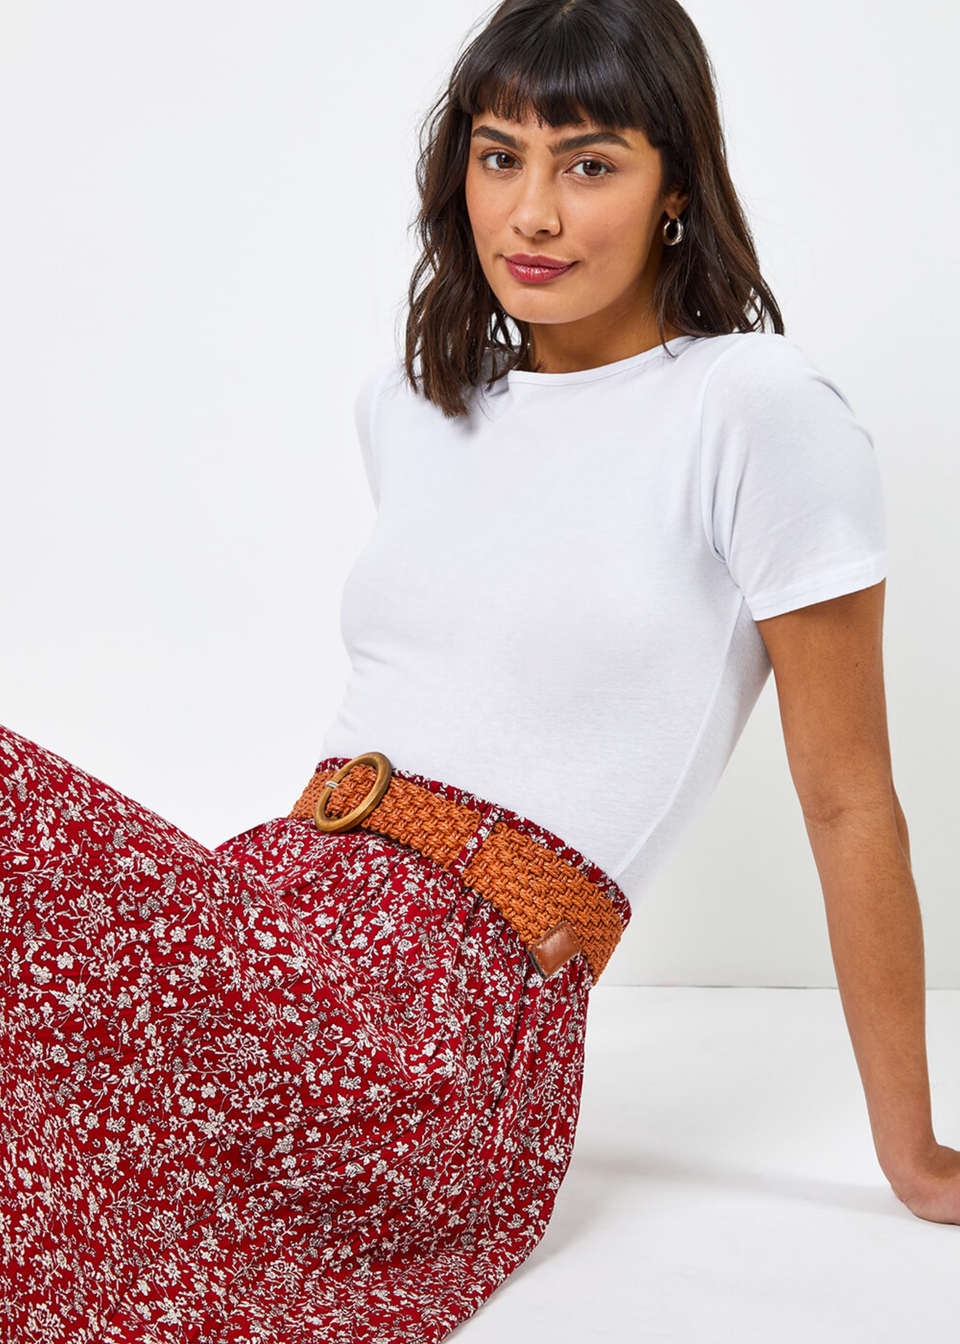 Roman Red Ditsy Floral Belted Midi Skirt